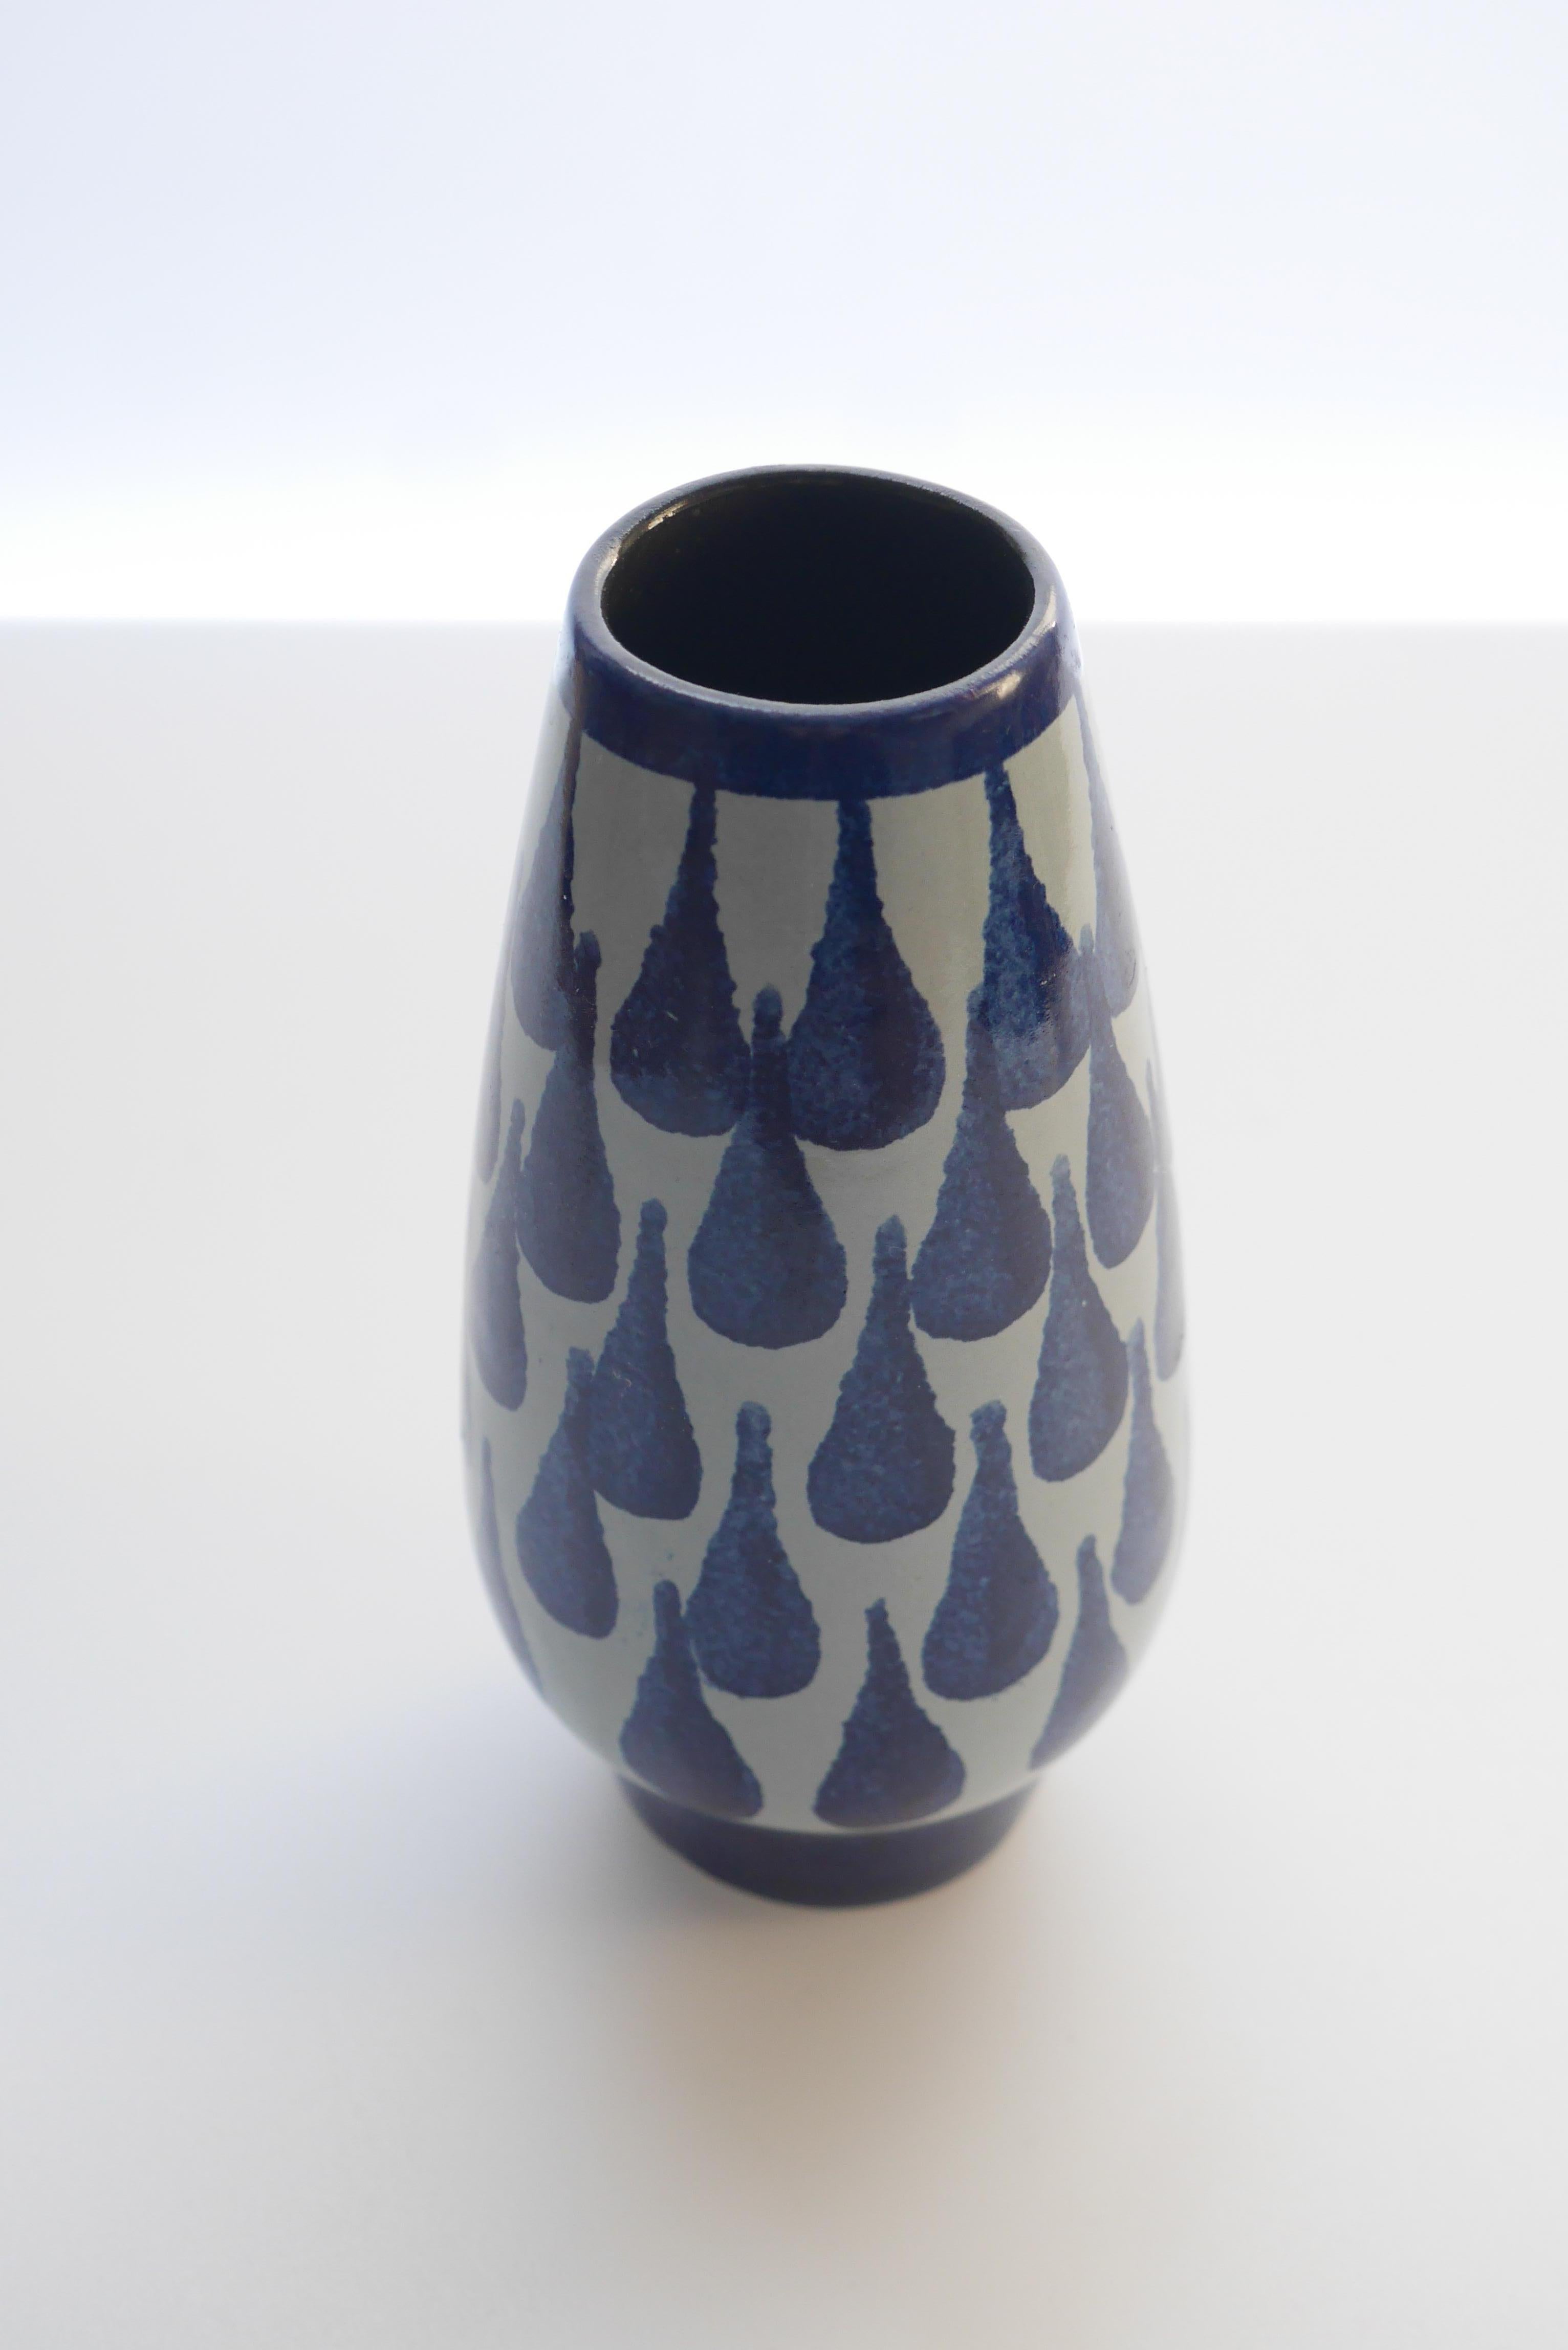 A really sweet, small vase, decorated with a blue drop pattern from Strehla Keramik, Germany, 1960s.

Strehla 1828-1989. 
Originates from Stehla, in Saxony, Germany. After World War II the region became a part of East Germany GDR and the production